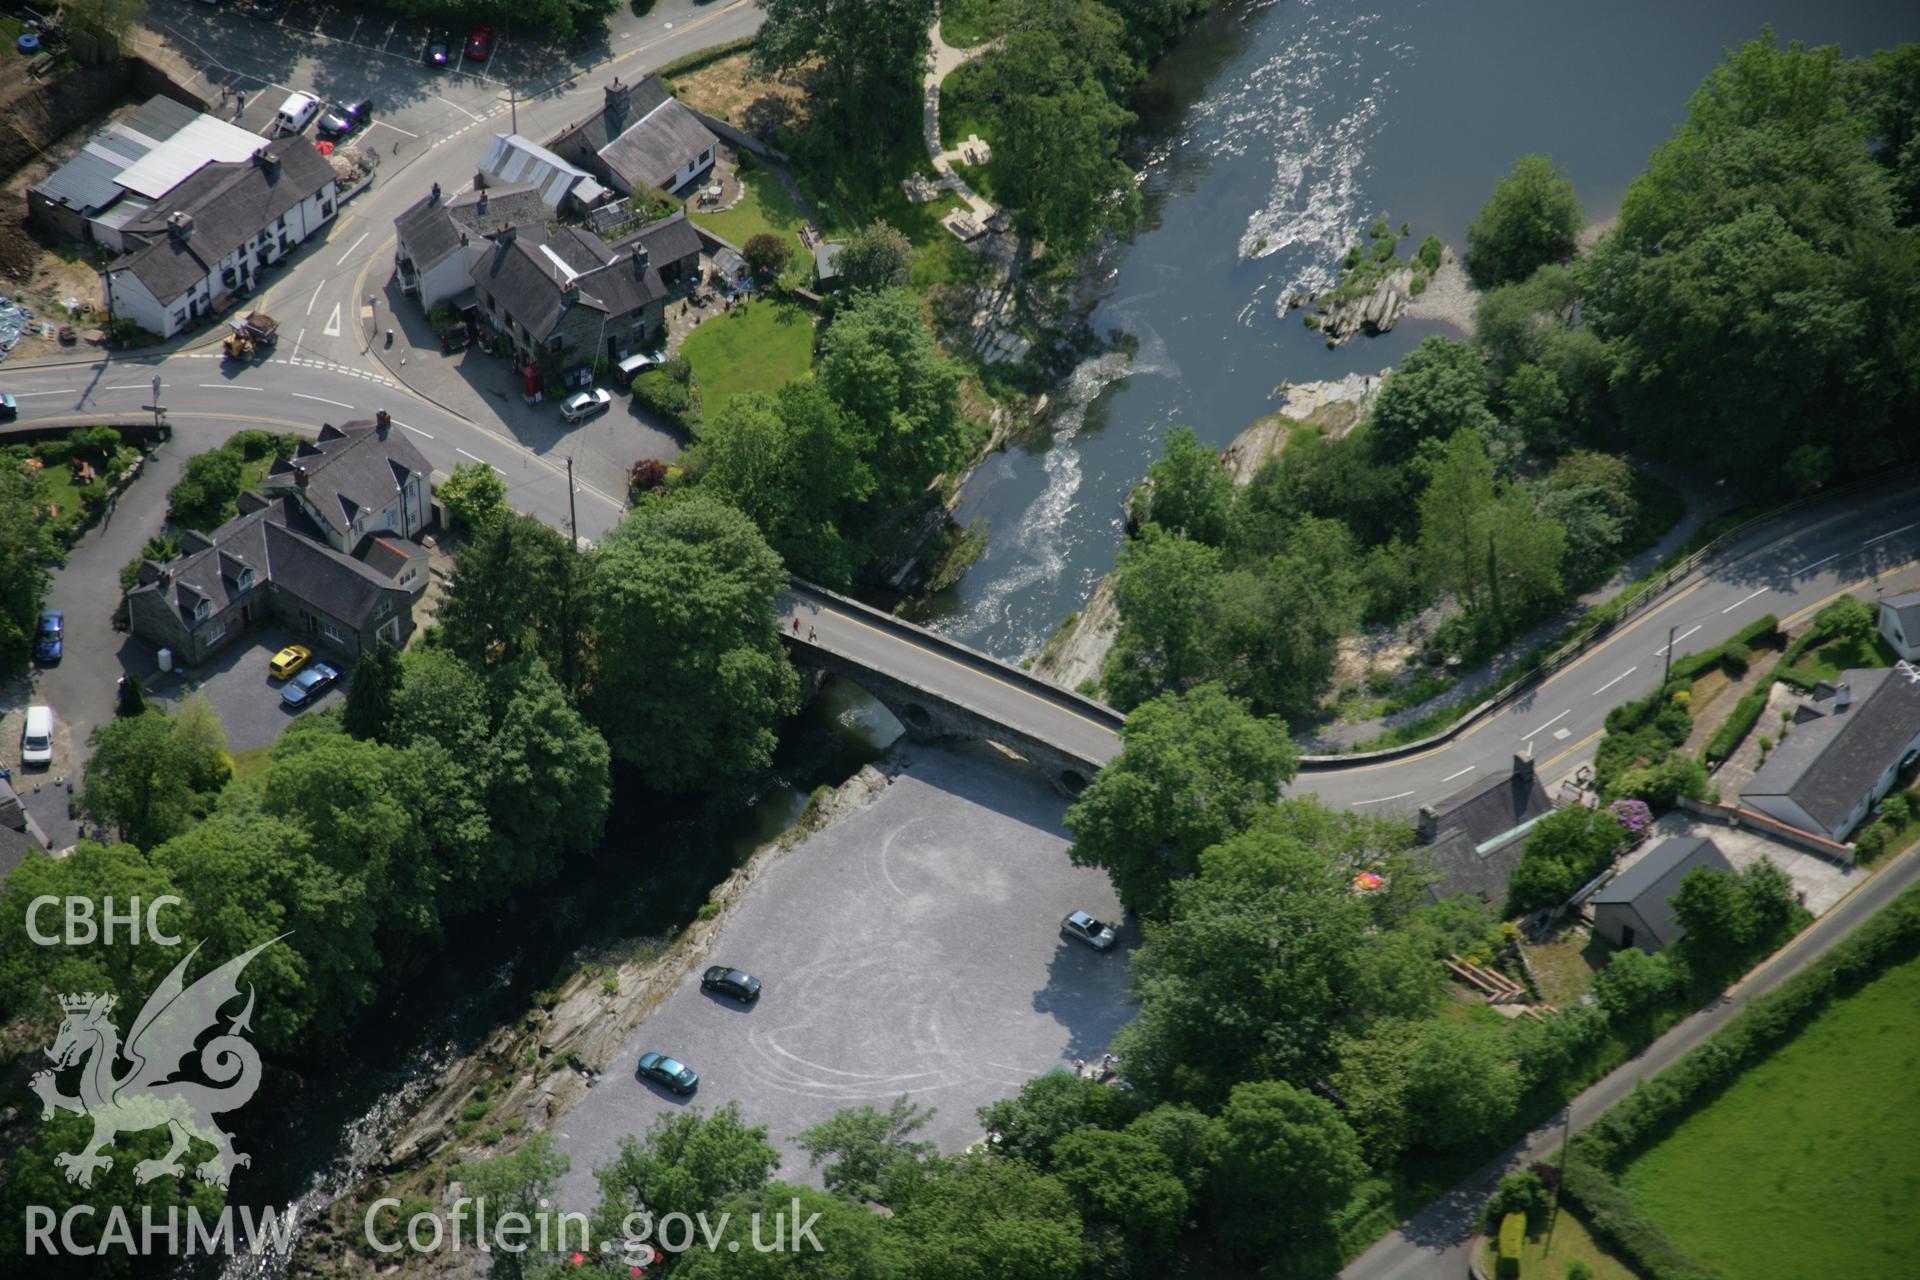 RCAHMW colour oblique aerial photograph of Cenarth Bridge from the north-east. Taken on 08 June 2006 by Toby Driver.